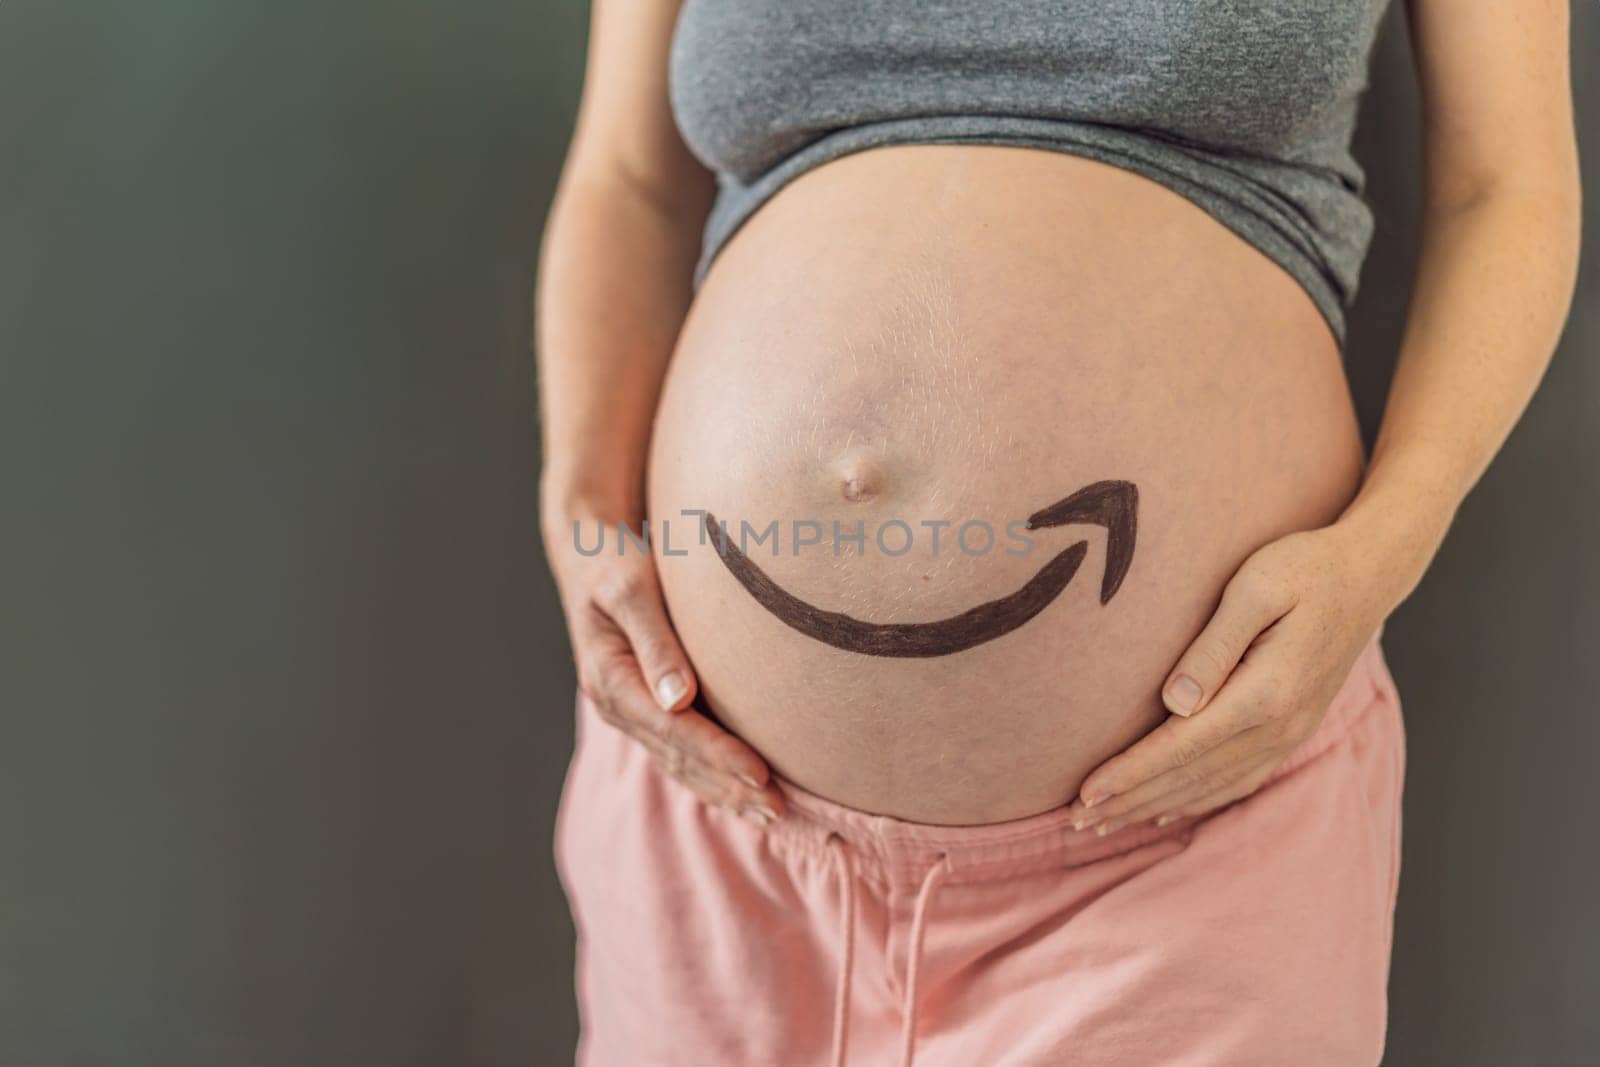 28.01.23, Mexico, Playa del Carmen: Creative concept of an Amazon icon on a pregnant belly, symbolizing the anticipation and delivery of joy, much like the reliable and timely services provided by Amazon. As well as products for pregnant women and babies on Amazon by galitskaya